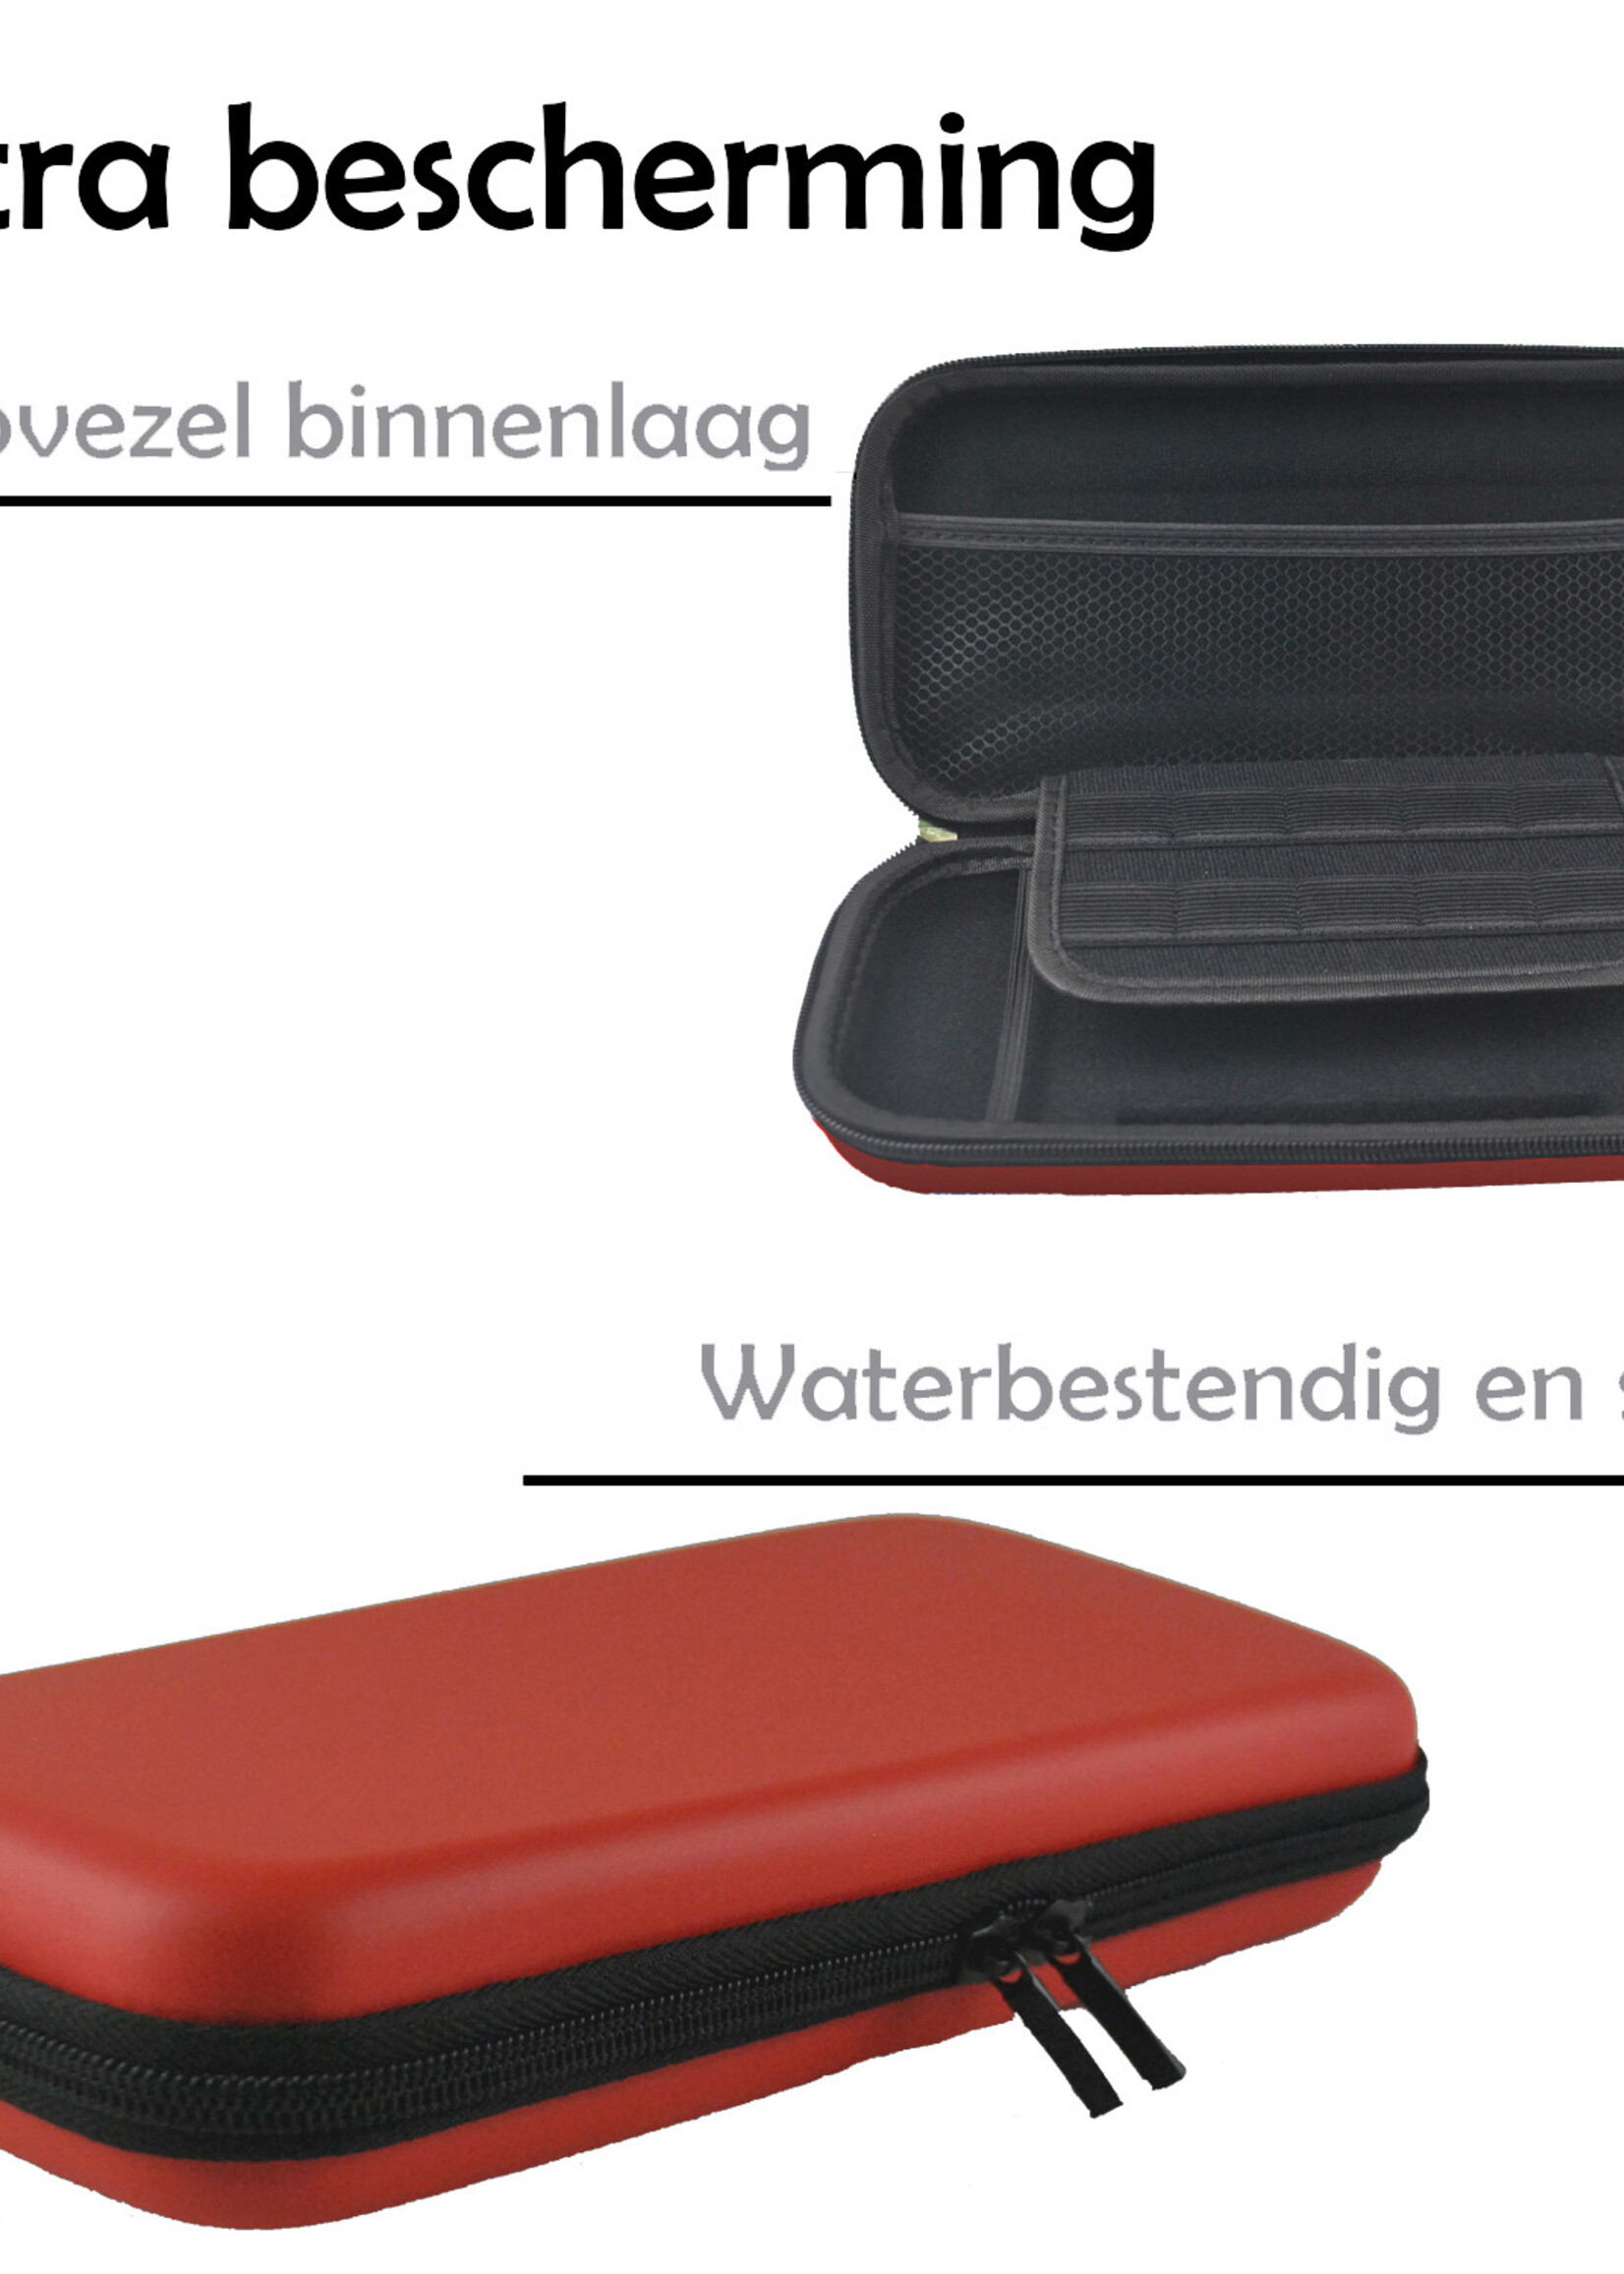 LUQ Hoes Geschikt voor Nintendo Switch Case Hoesje Met Koord - Bescherm Hoes Geschikt voor Nintendo Switch Hoes Hard Cover - Rood